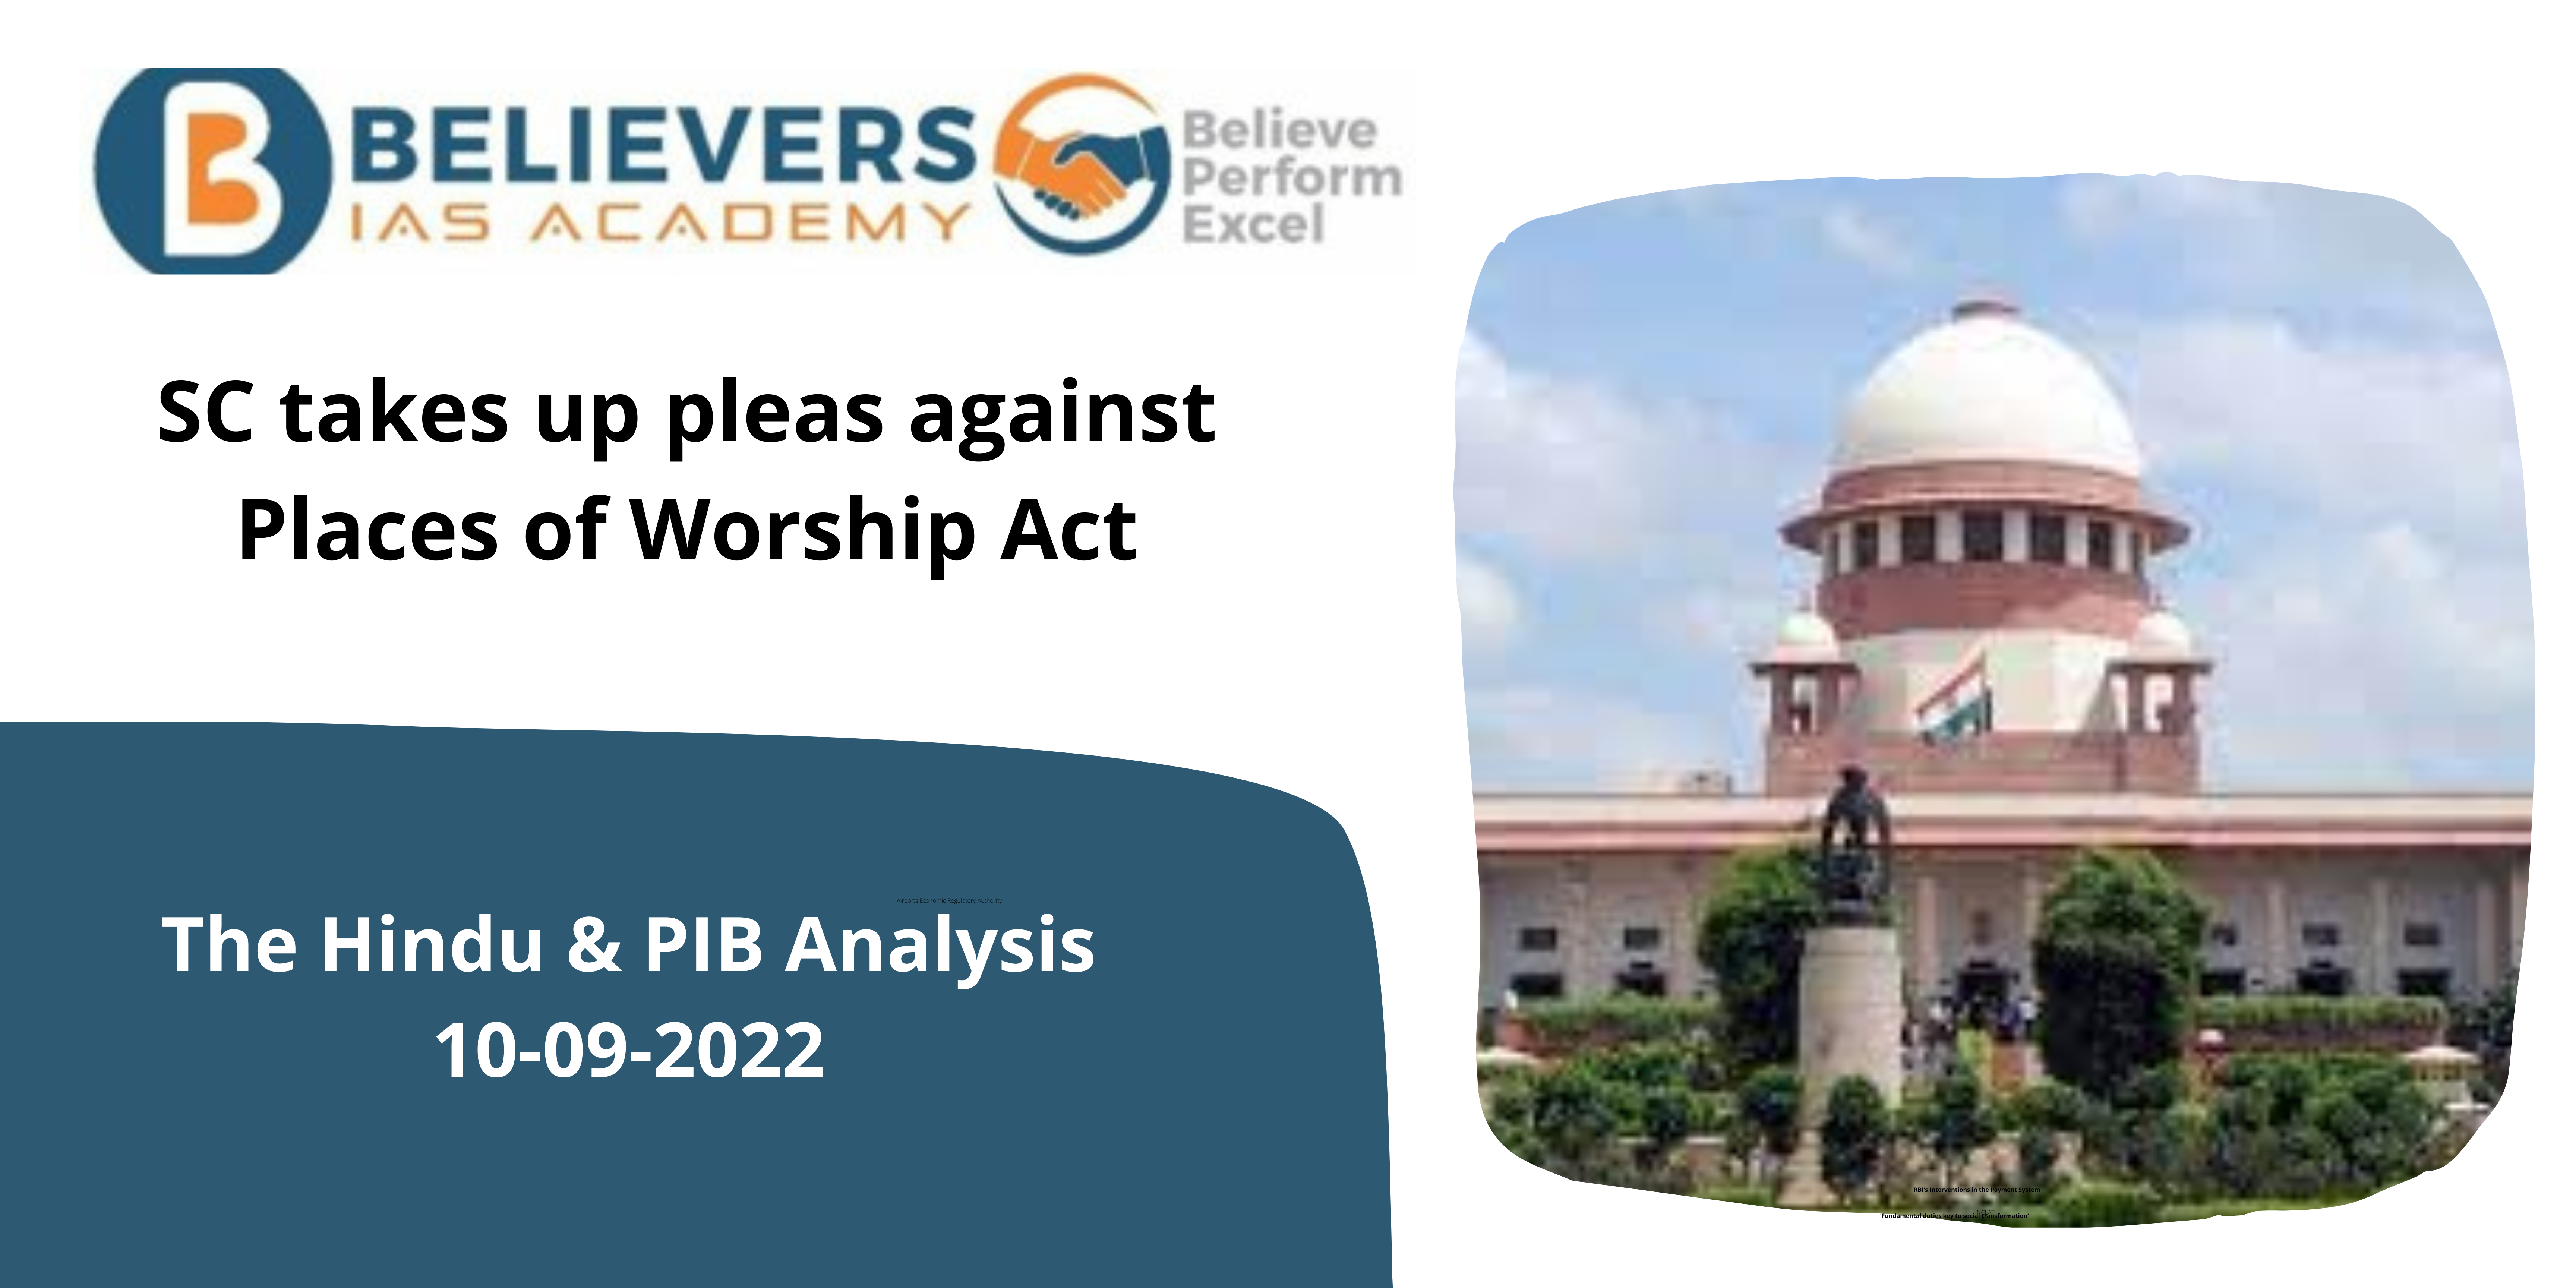 SC takes up pleas against Places of Worship Act